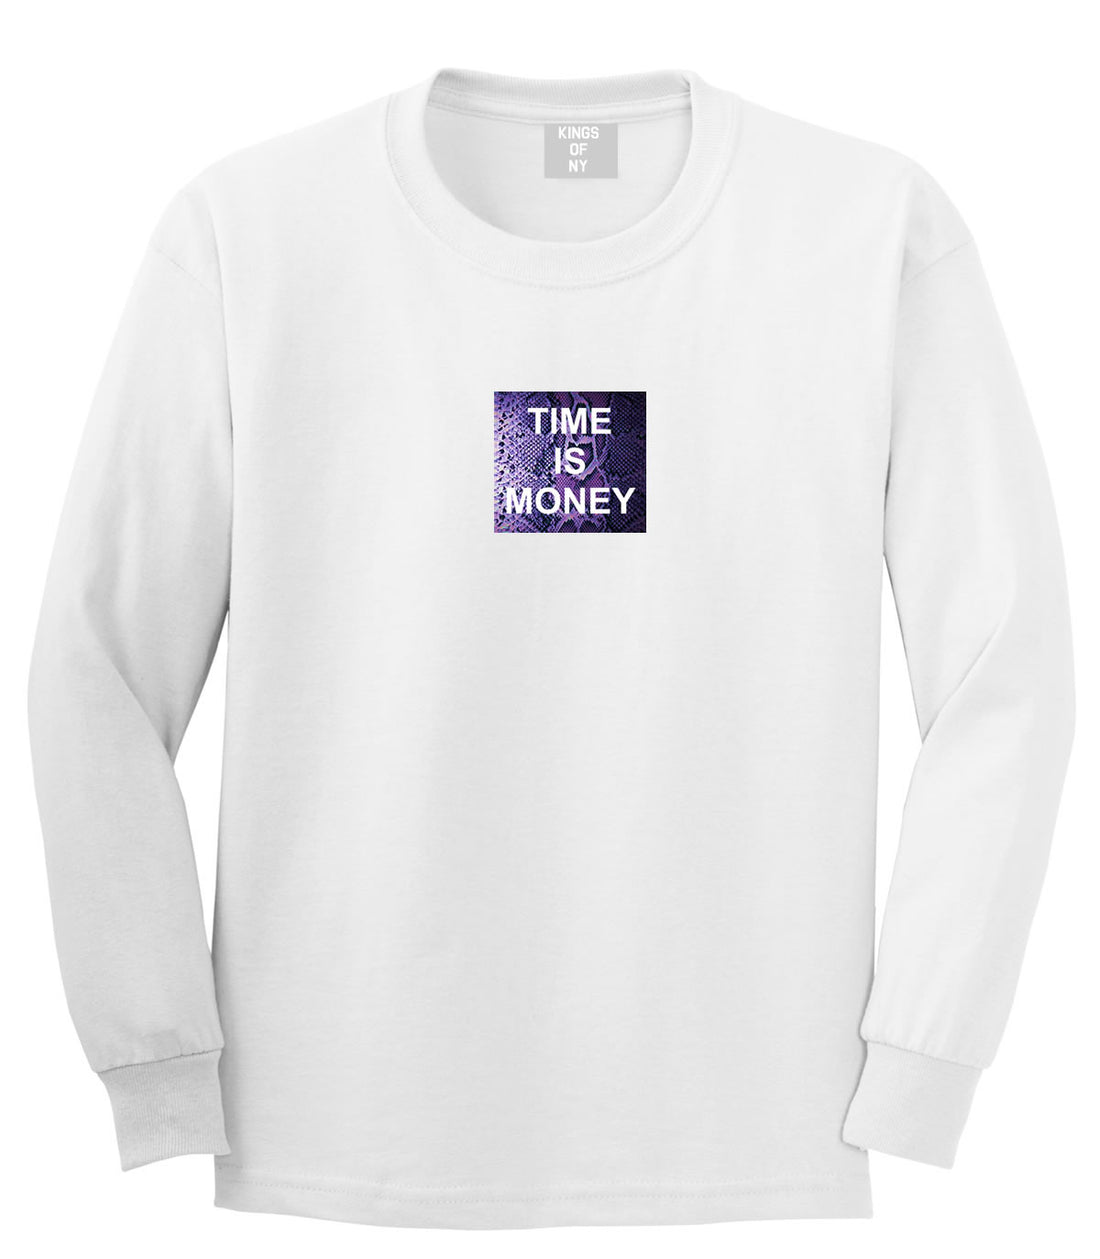 Time Is Money Snakesin Print Long Sleeve T-Shirt in White By Kings Of NY